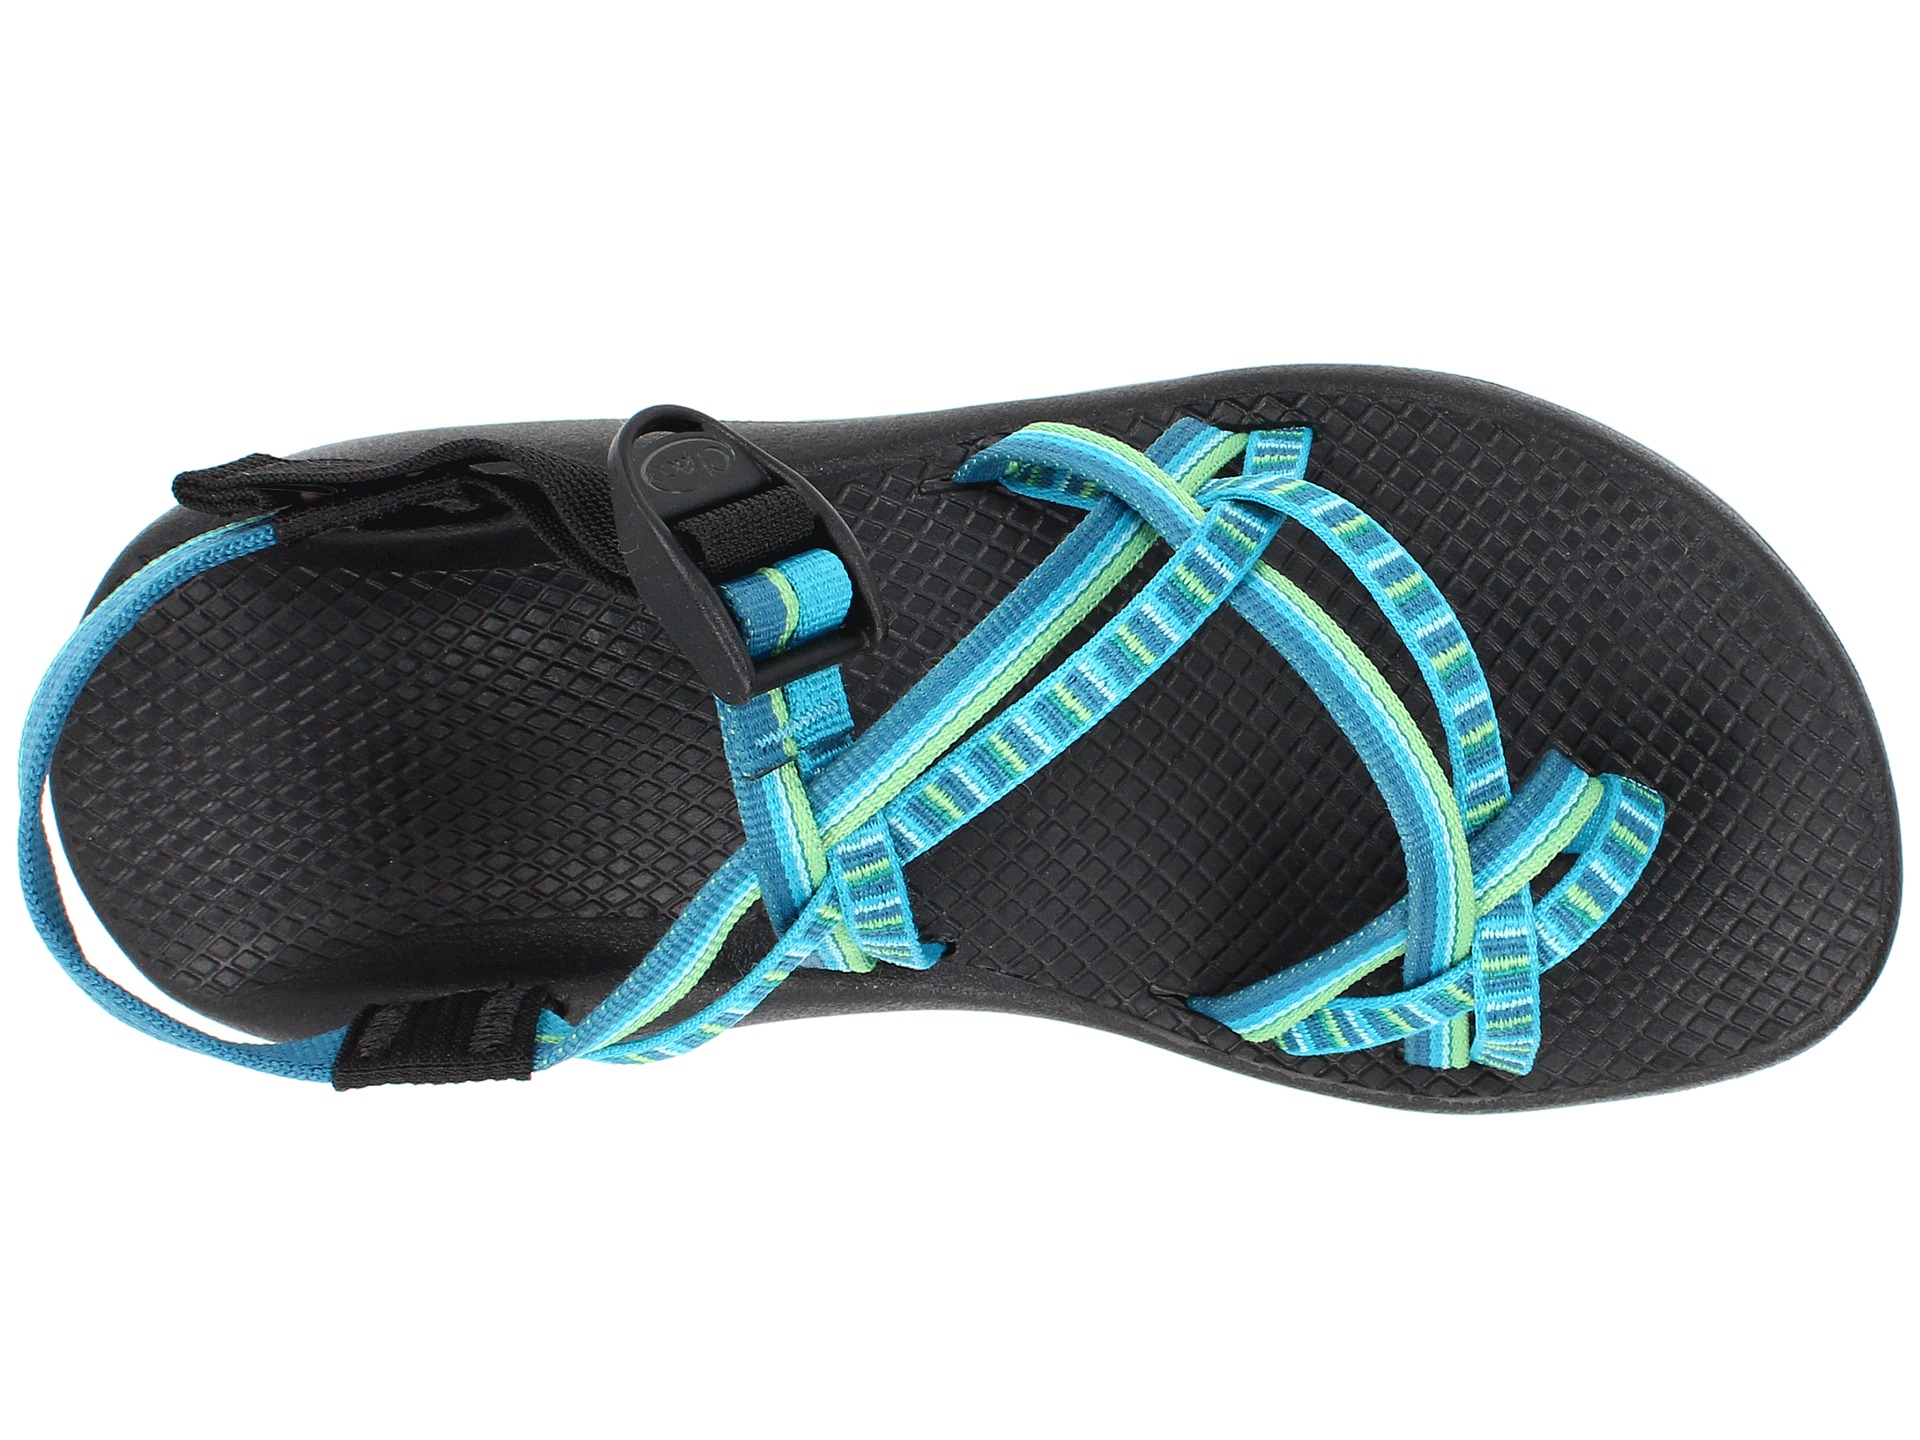 Chaco Zx 2 Yampa, Shoes | Shipped Free at Zappos